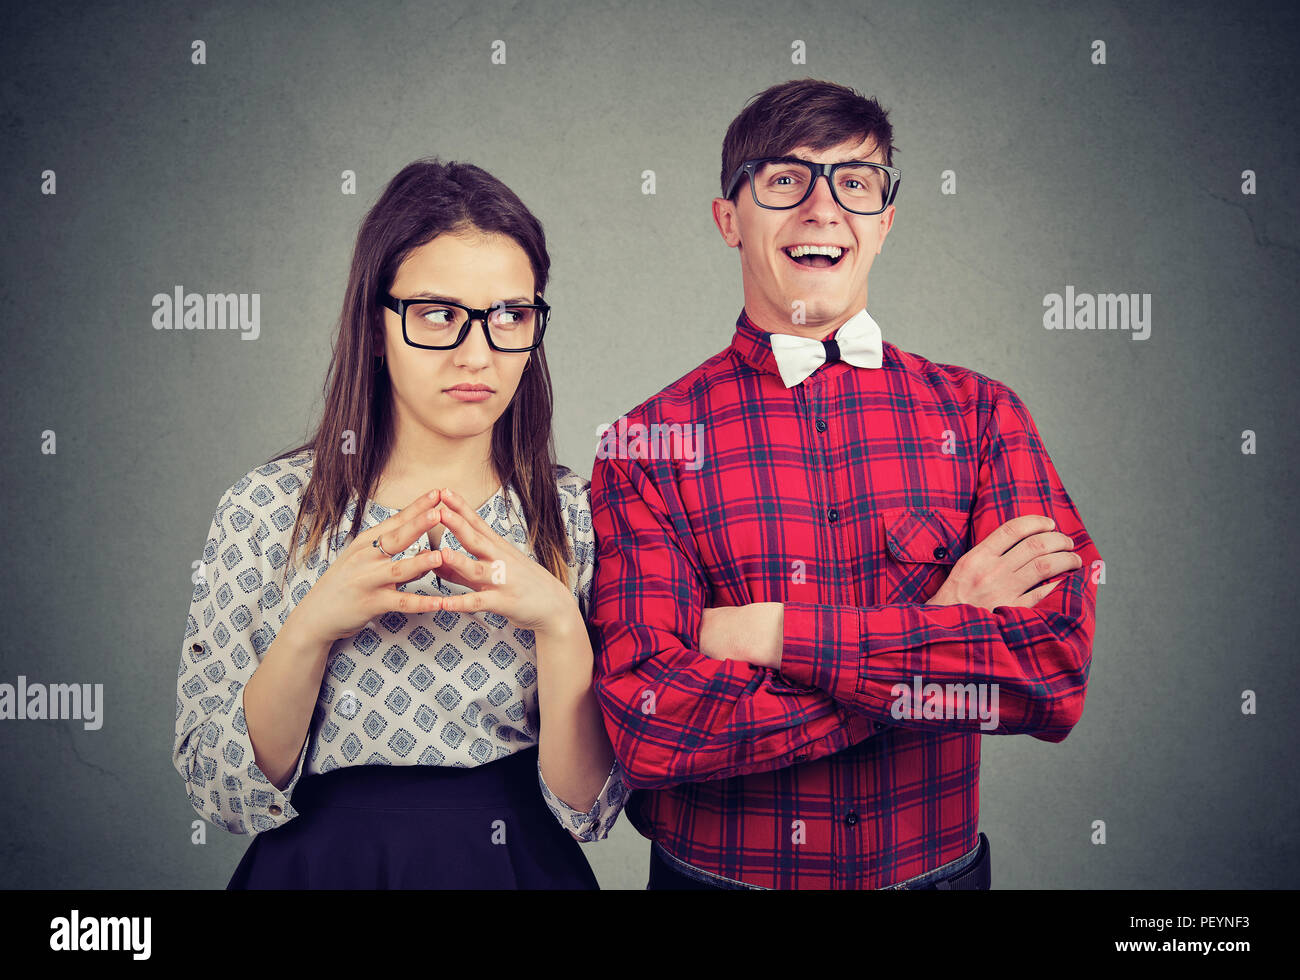 Young couple of different characters with cheerful happy man and grumpy negative woman on gray background Stock Photo